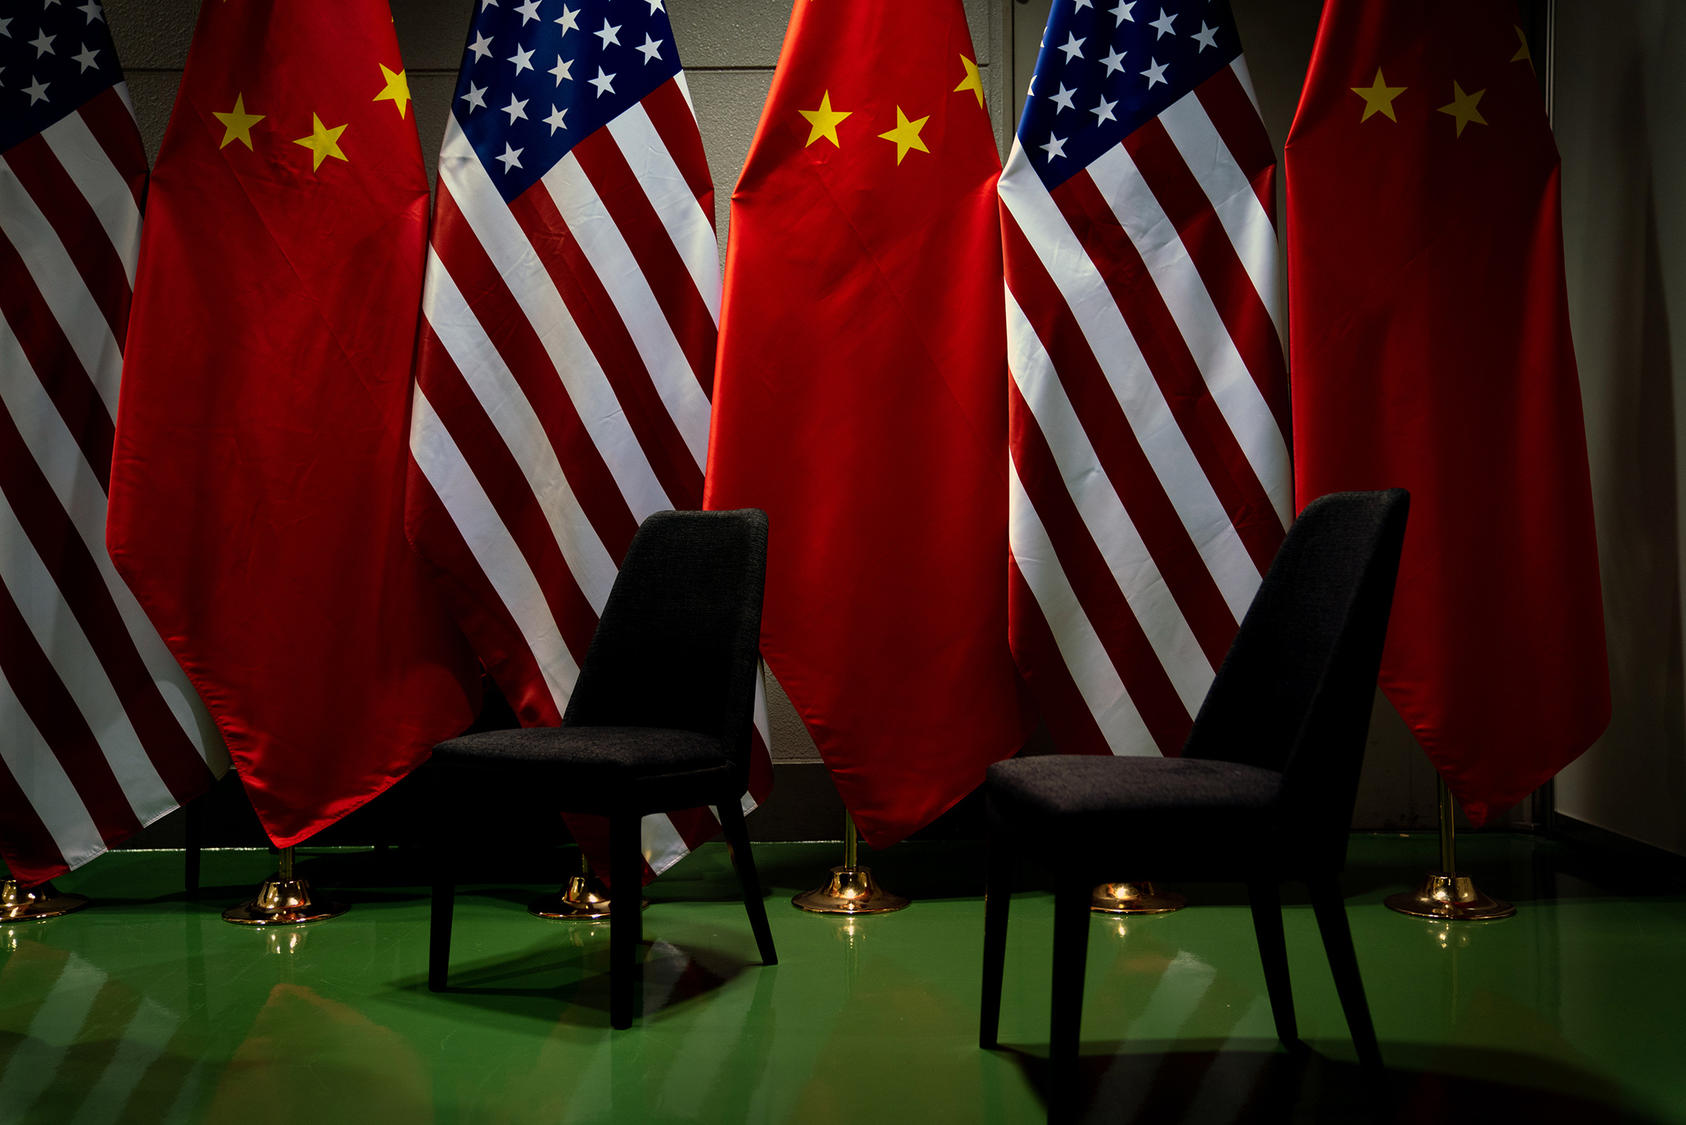 The flags of the United States and China at the site of a bilateral meeting between President Donald Trump and China’s leader, Xi Jinping, at the Group of 20 summit in Osaka, Japan, on June 29, 2019. (Erin Schaff/The New York Times)